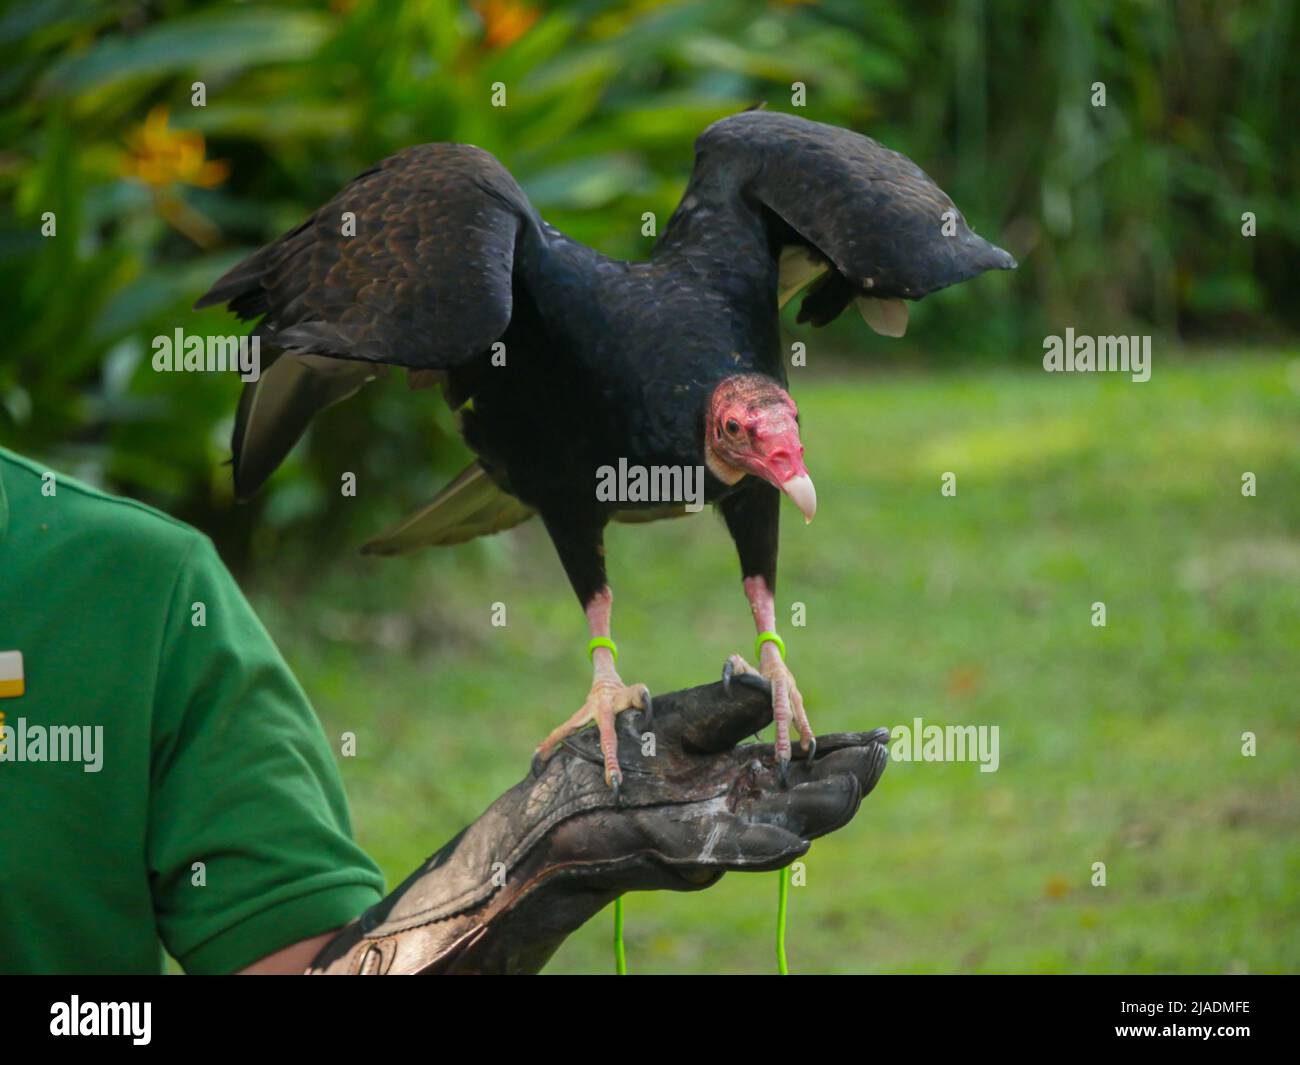 Vulture in a Park, pink color beak, black body, wing open Stock Photo